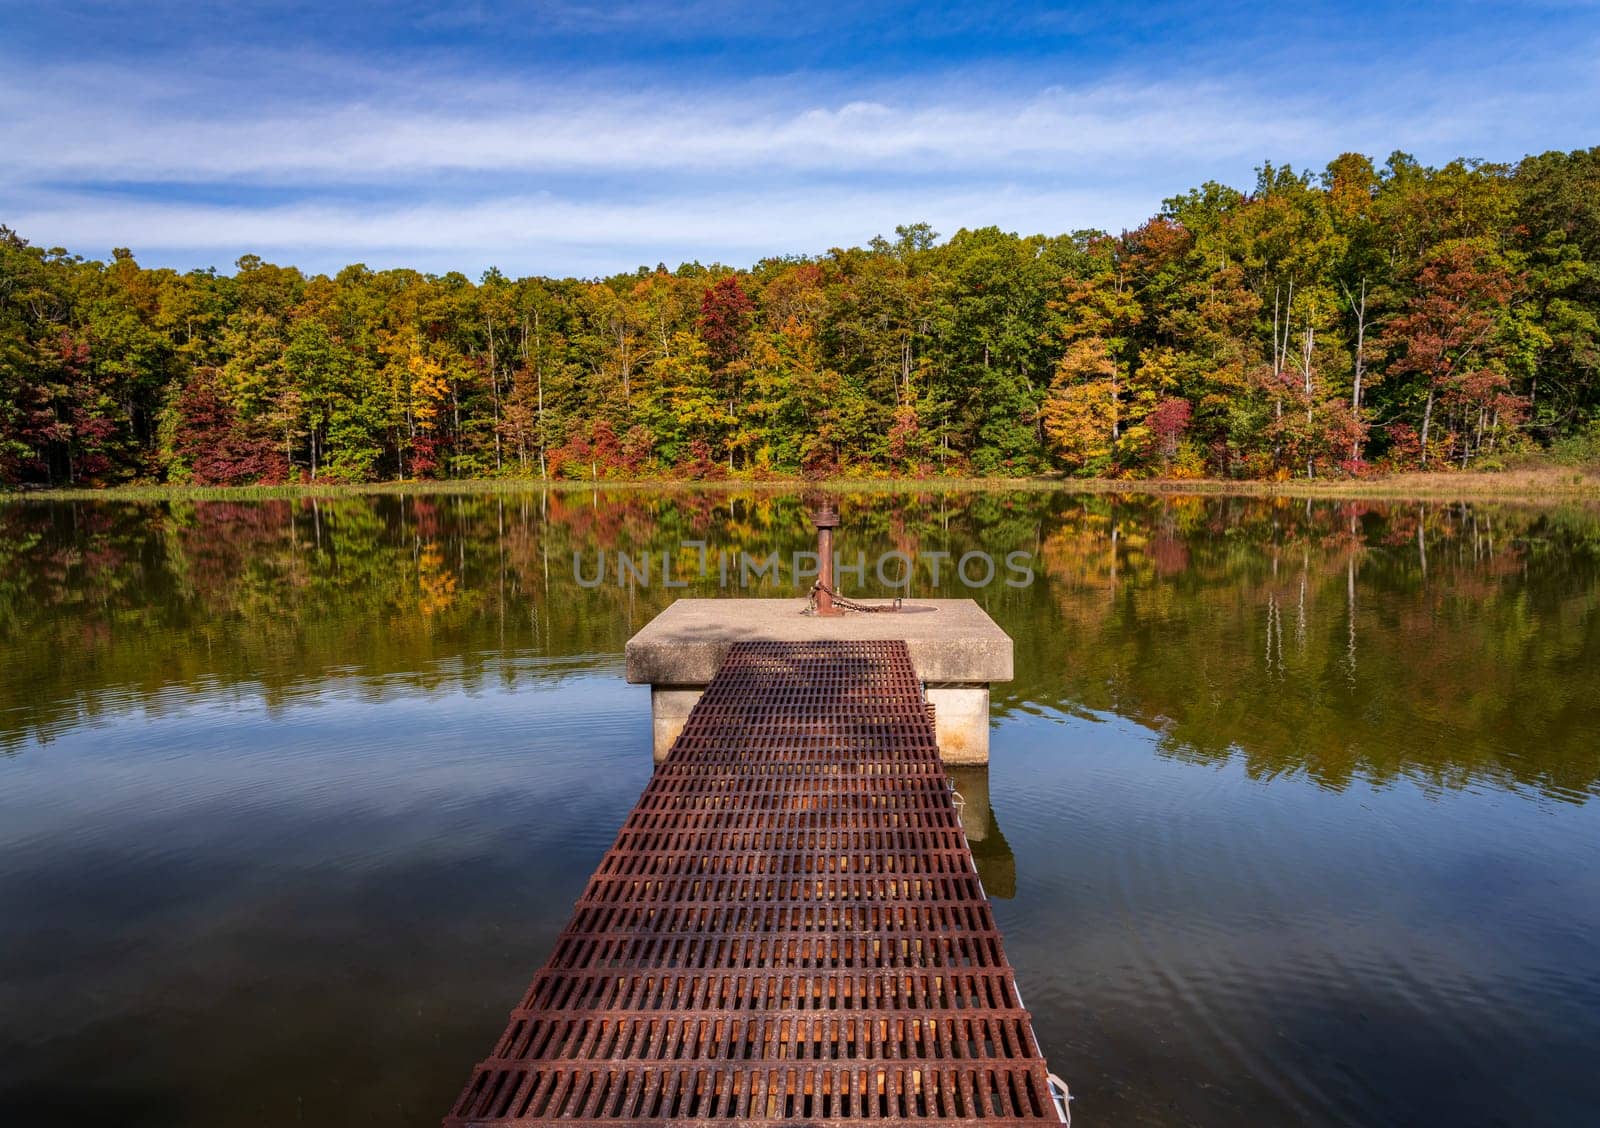 Fall leaves and metal pier in Coopers Rock State Forest in WV by steheap